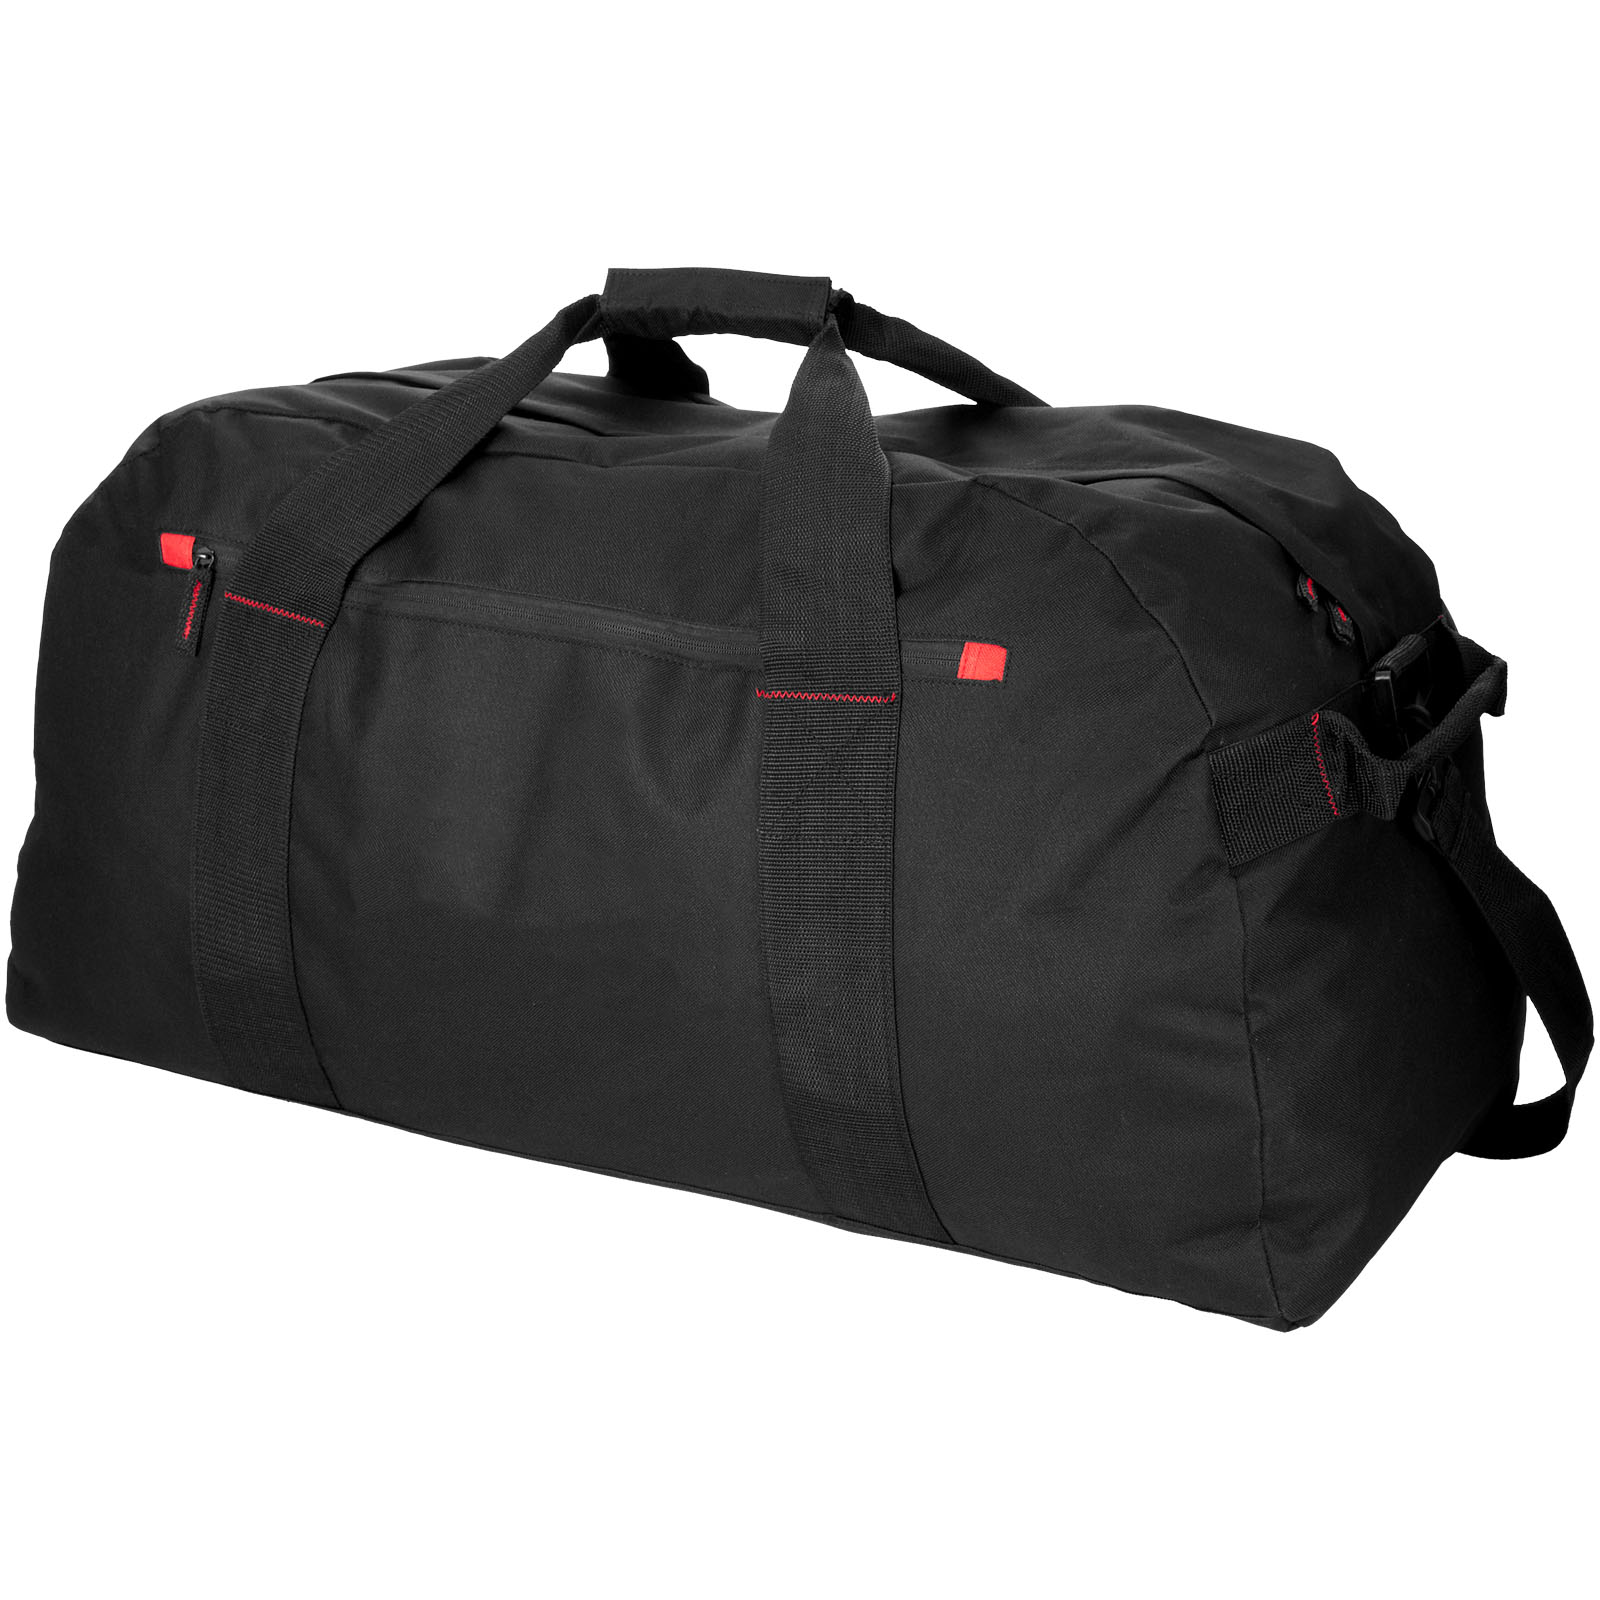 Sport & Gym bags - Vancouver extra large travel duffel bag 75L